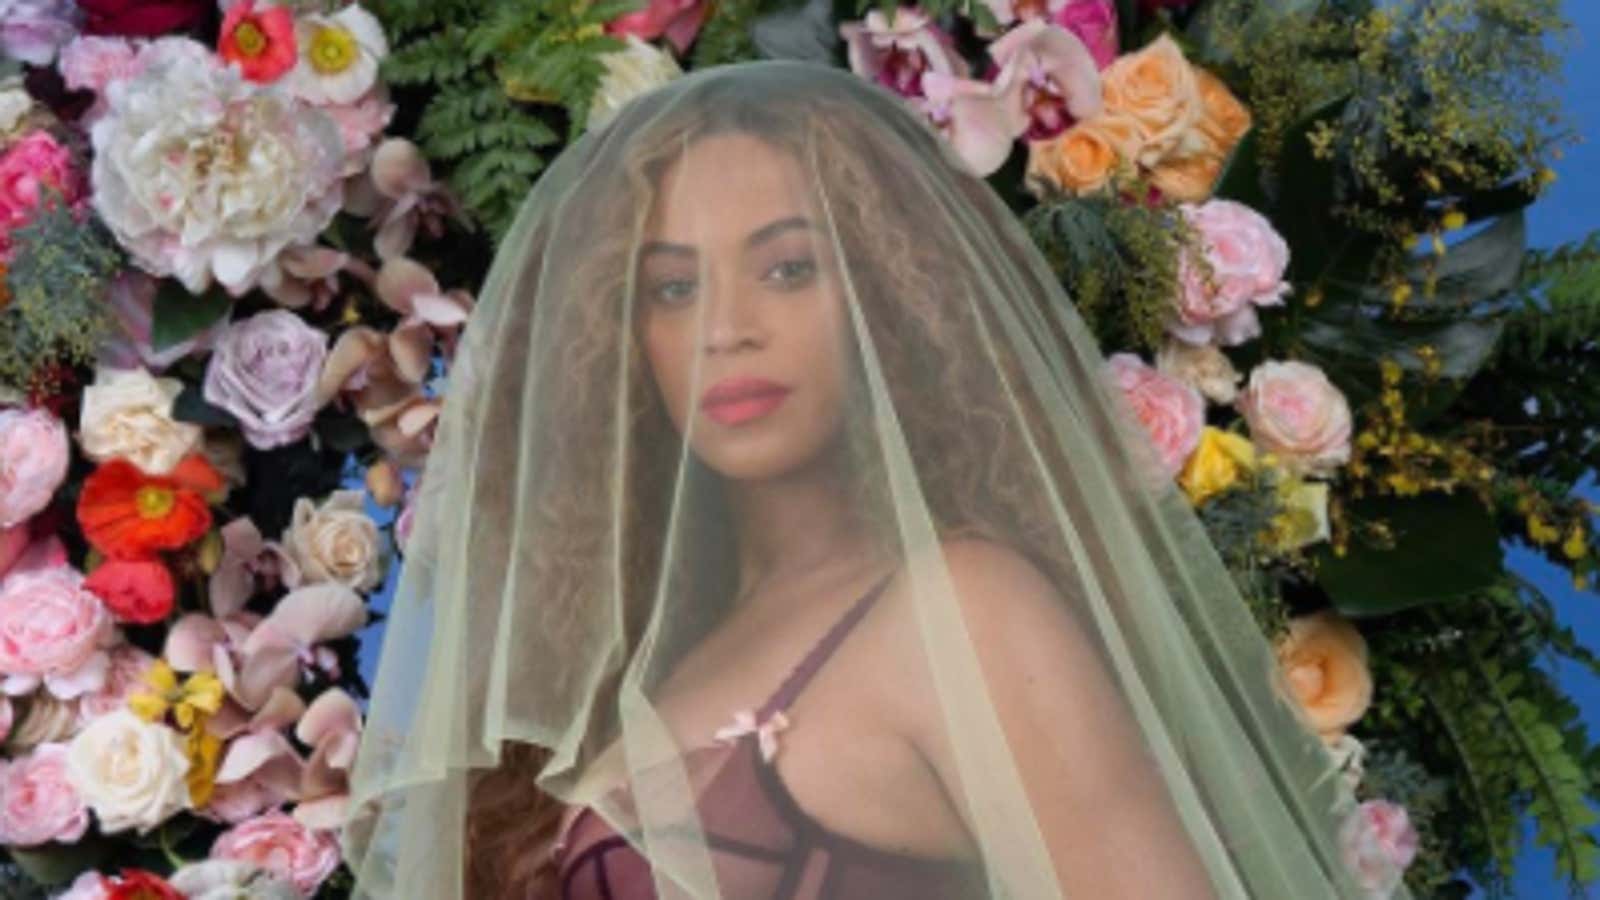 Beyonce Shoots Down Pregnancy Rumors with Champagne Toast?